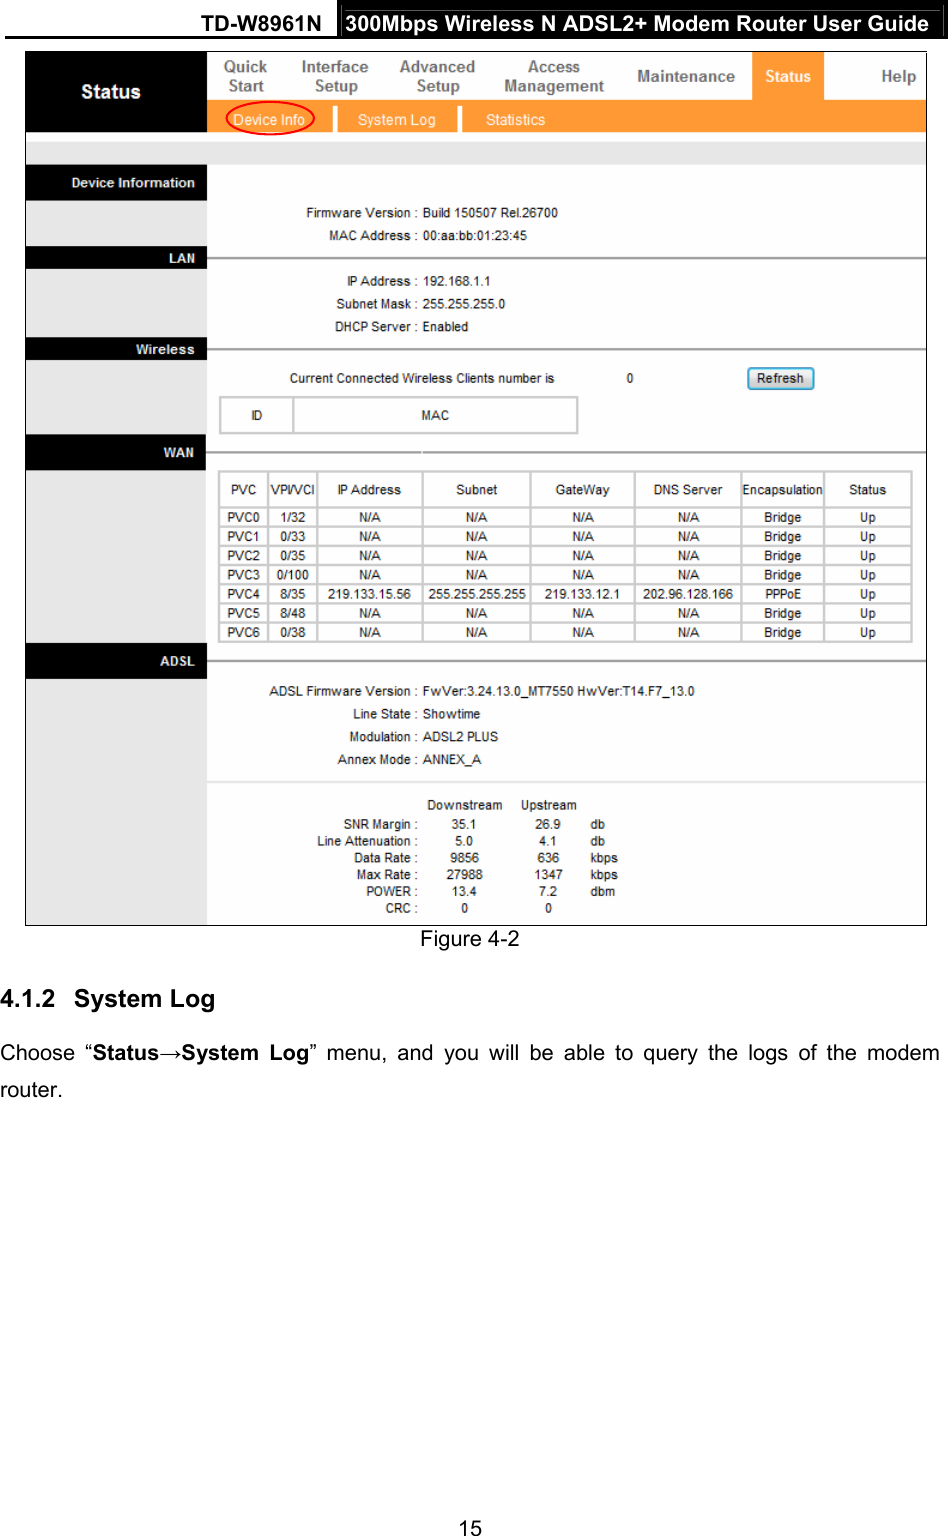 TD-W8961N  300Mbps Wireless N ADSL2+ Modem Router User Guide 15    Figure 4-2 4.1.2  System Log Choose “Status→System Log” menu, and you will be able to query the logs of the modem router. 